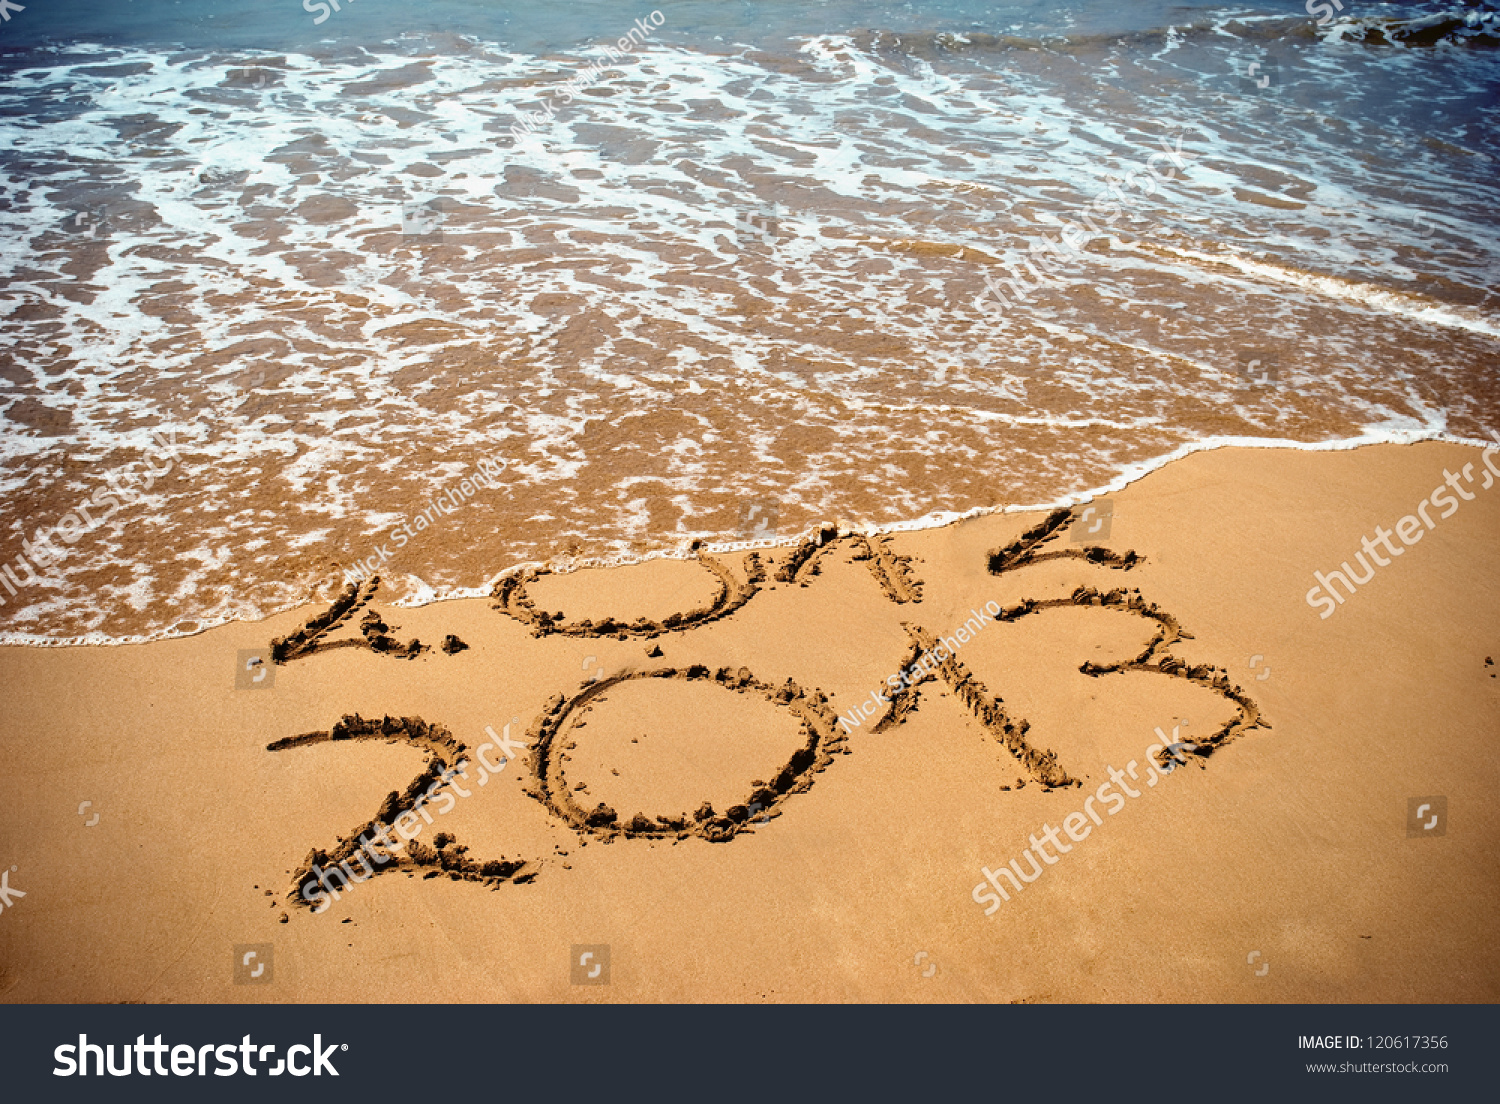 New Year 2013 is coming concept - inscription 2012 and 2013 on a beach sand, the wave is covering digits 2012 #120617356